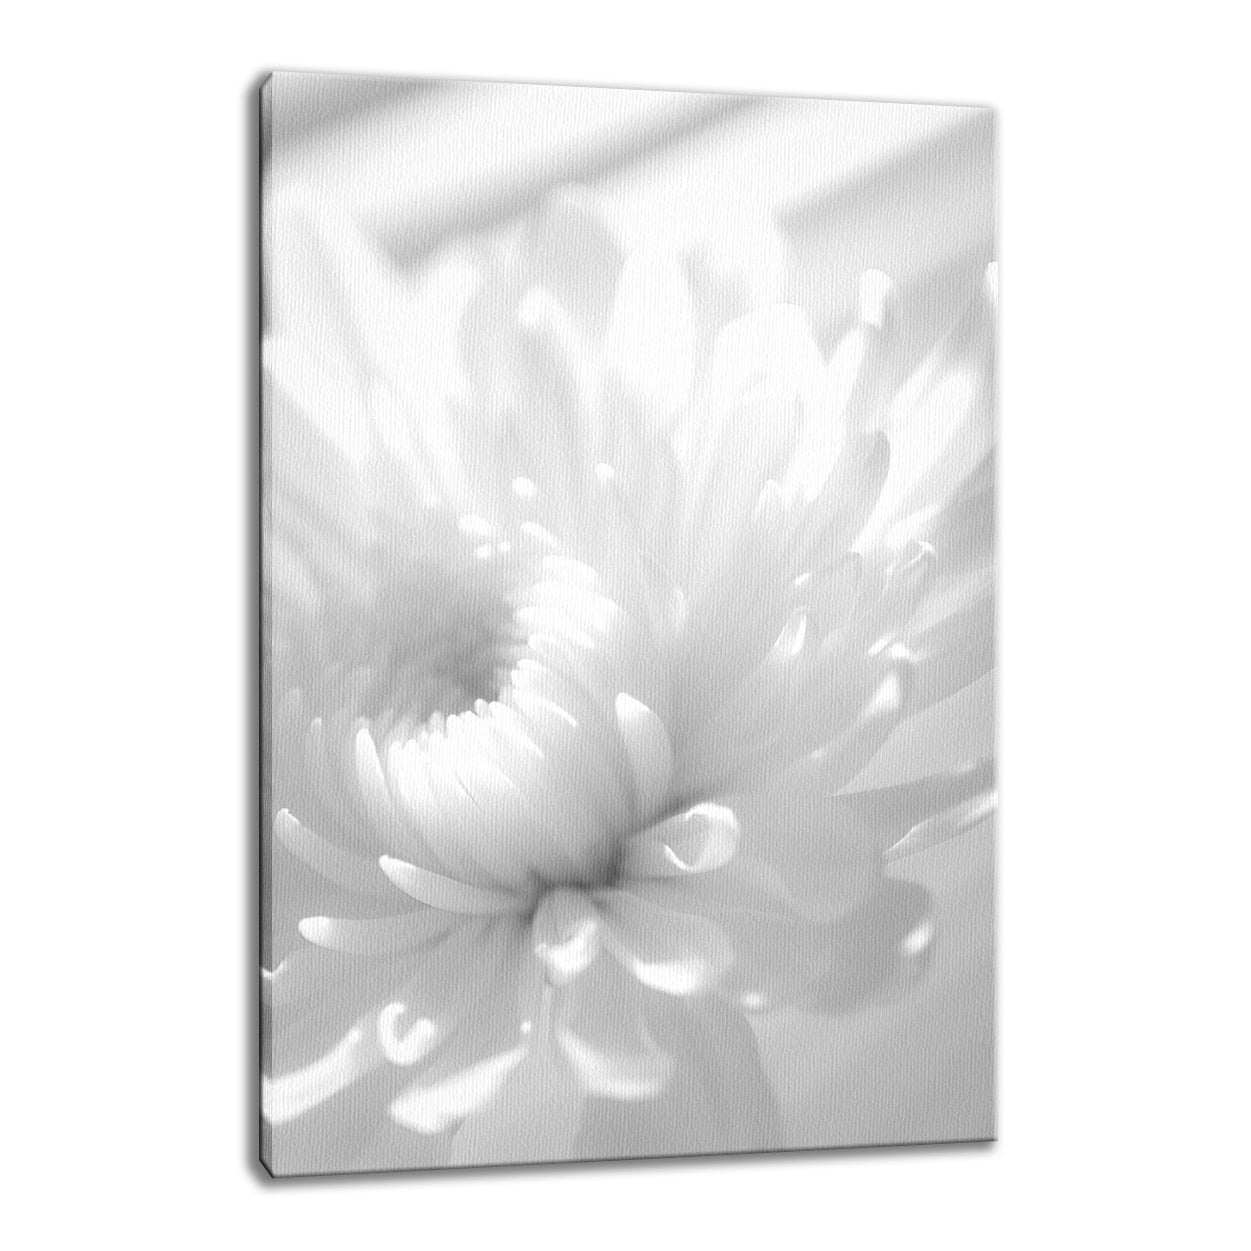 Infrared Flower Nature / Floral Photo Fine Art Canvas Wall Art Prints  - PIPAFINEART